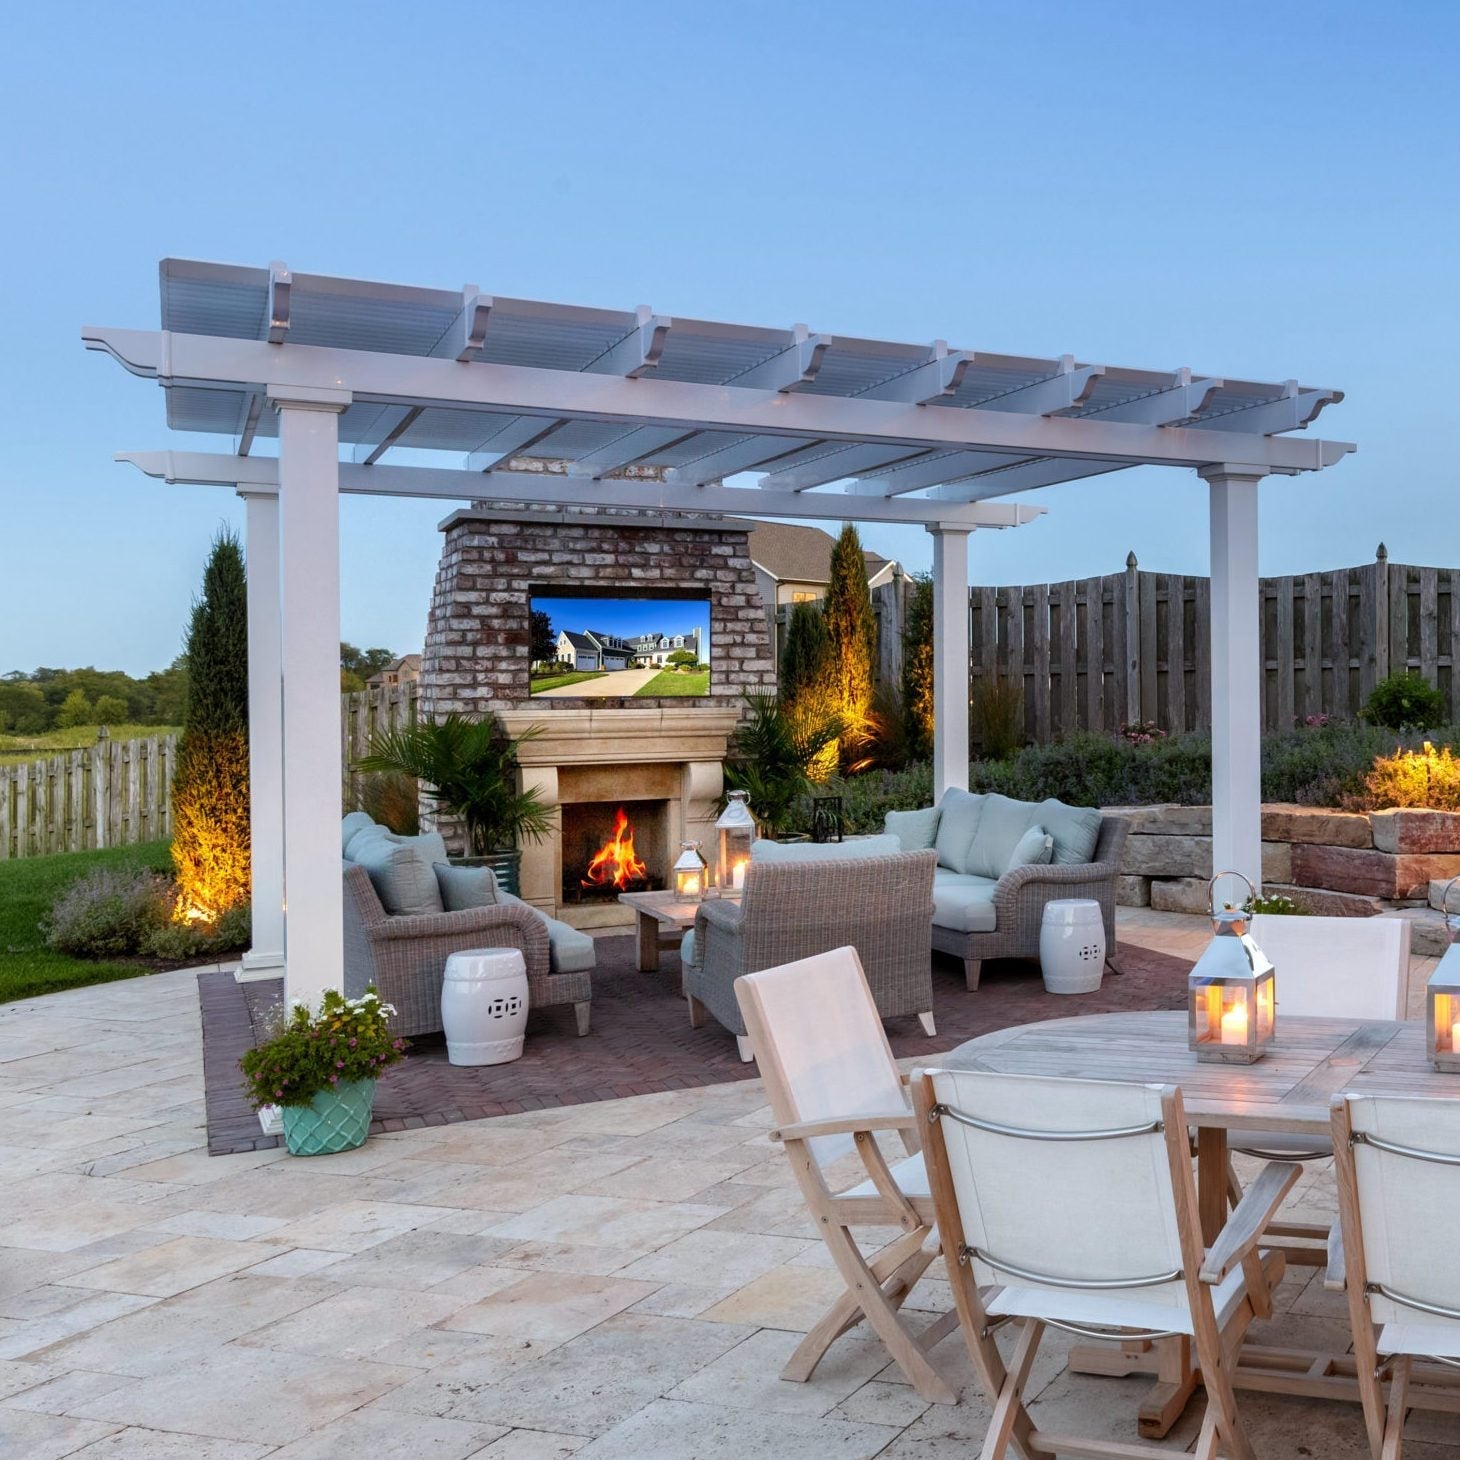 Picture of a white 4-post traditional pergola with overhangs covering several outdoor couches next to a tall brick fireplace and TV